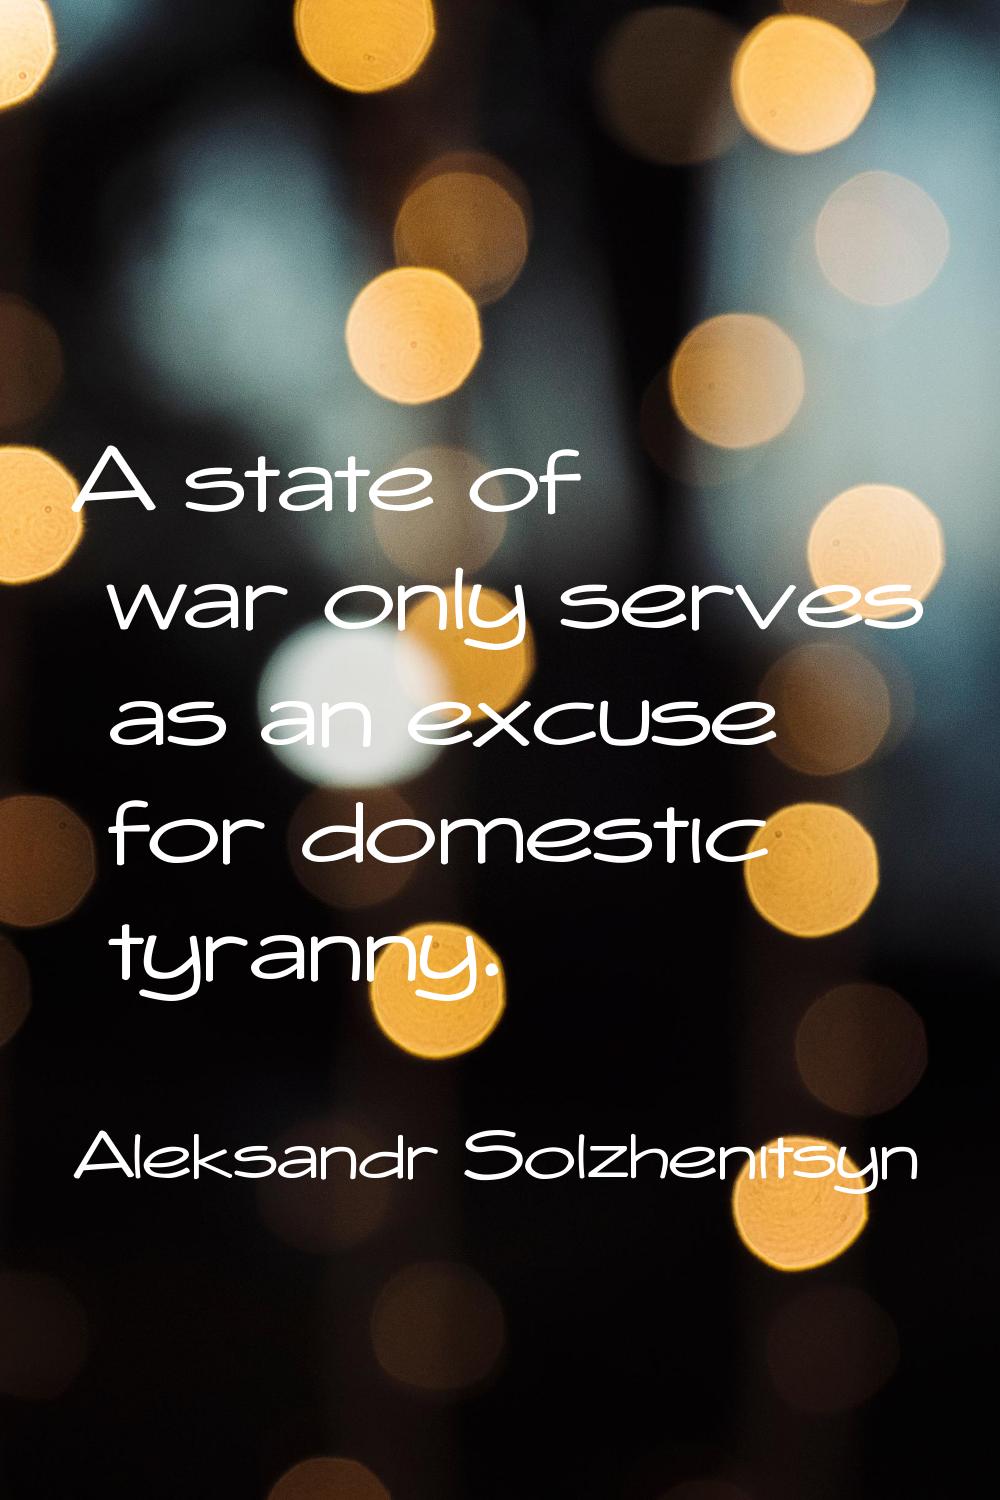 A state of war only serves as an excuse for domestic tyranny.